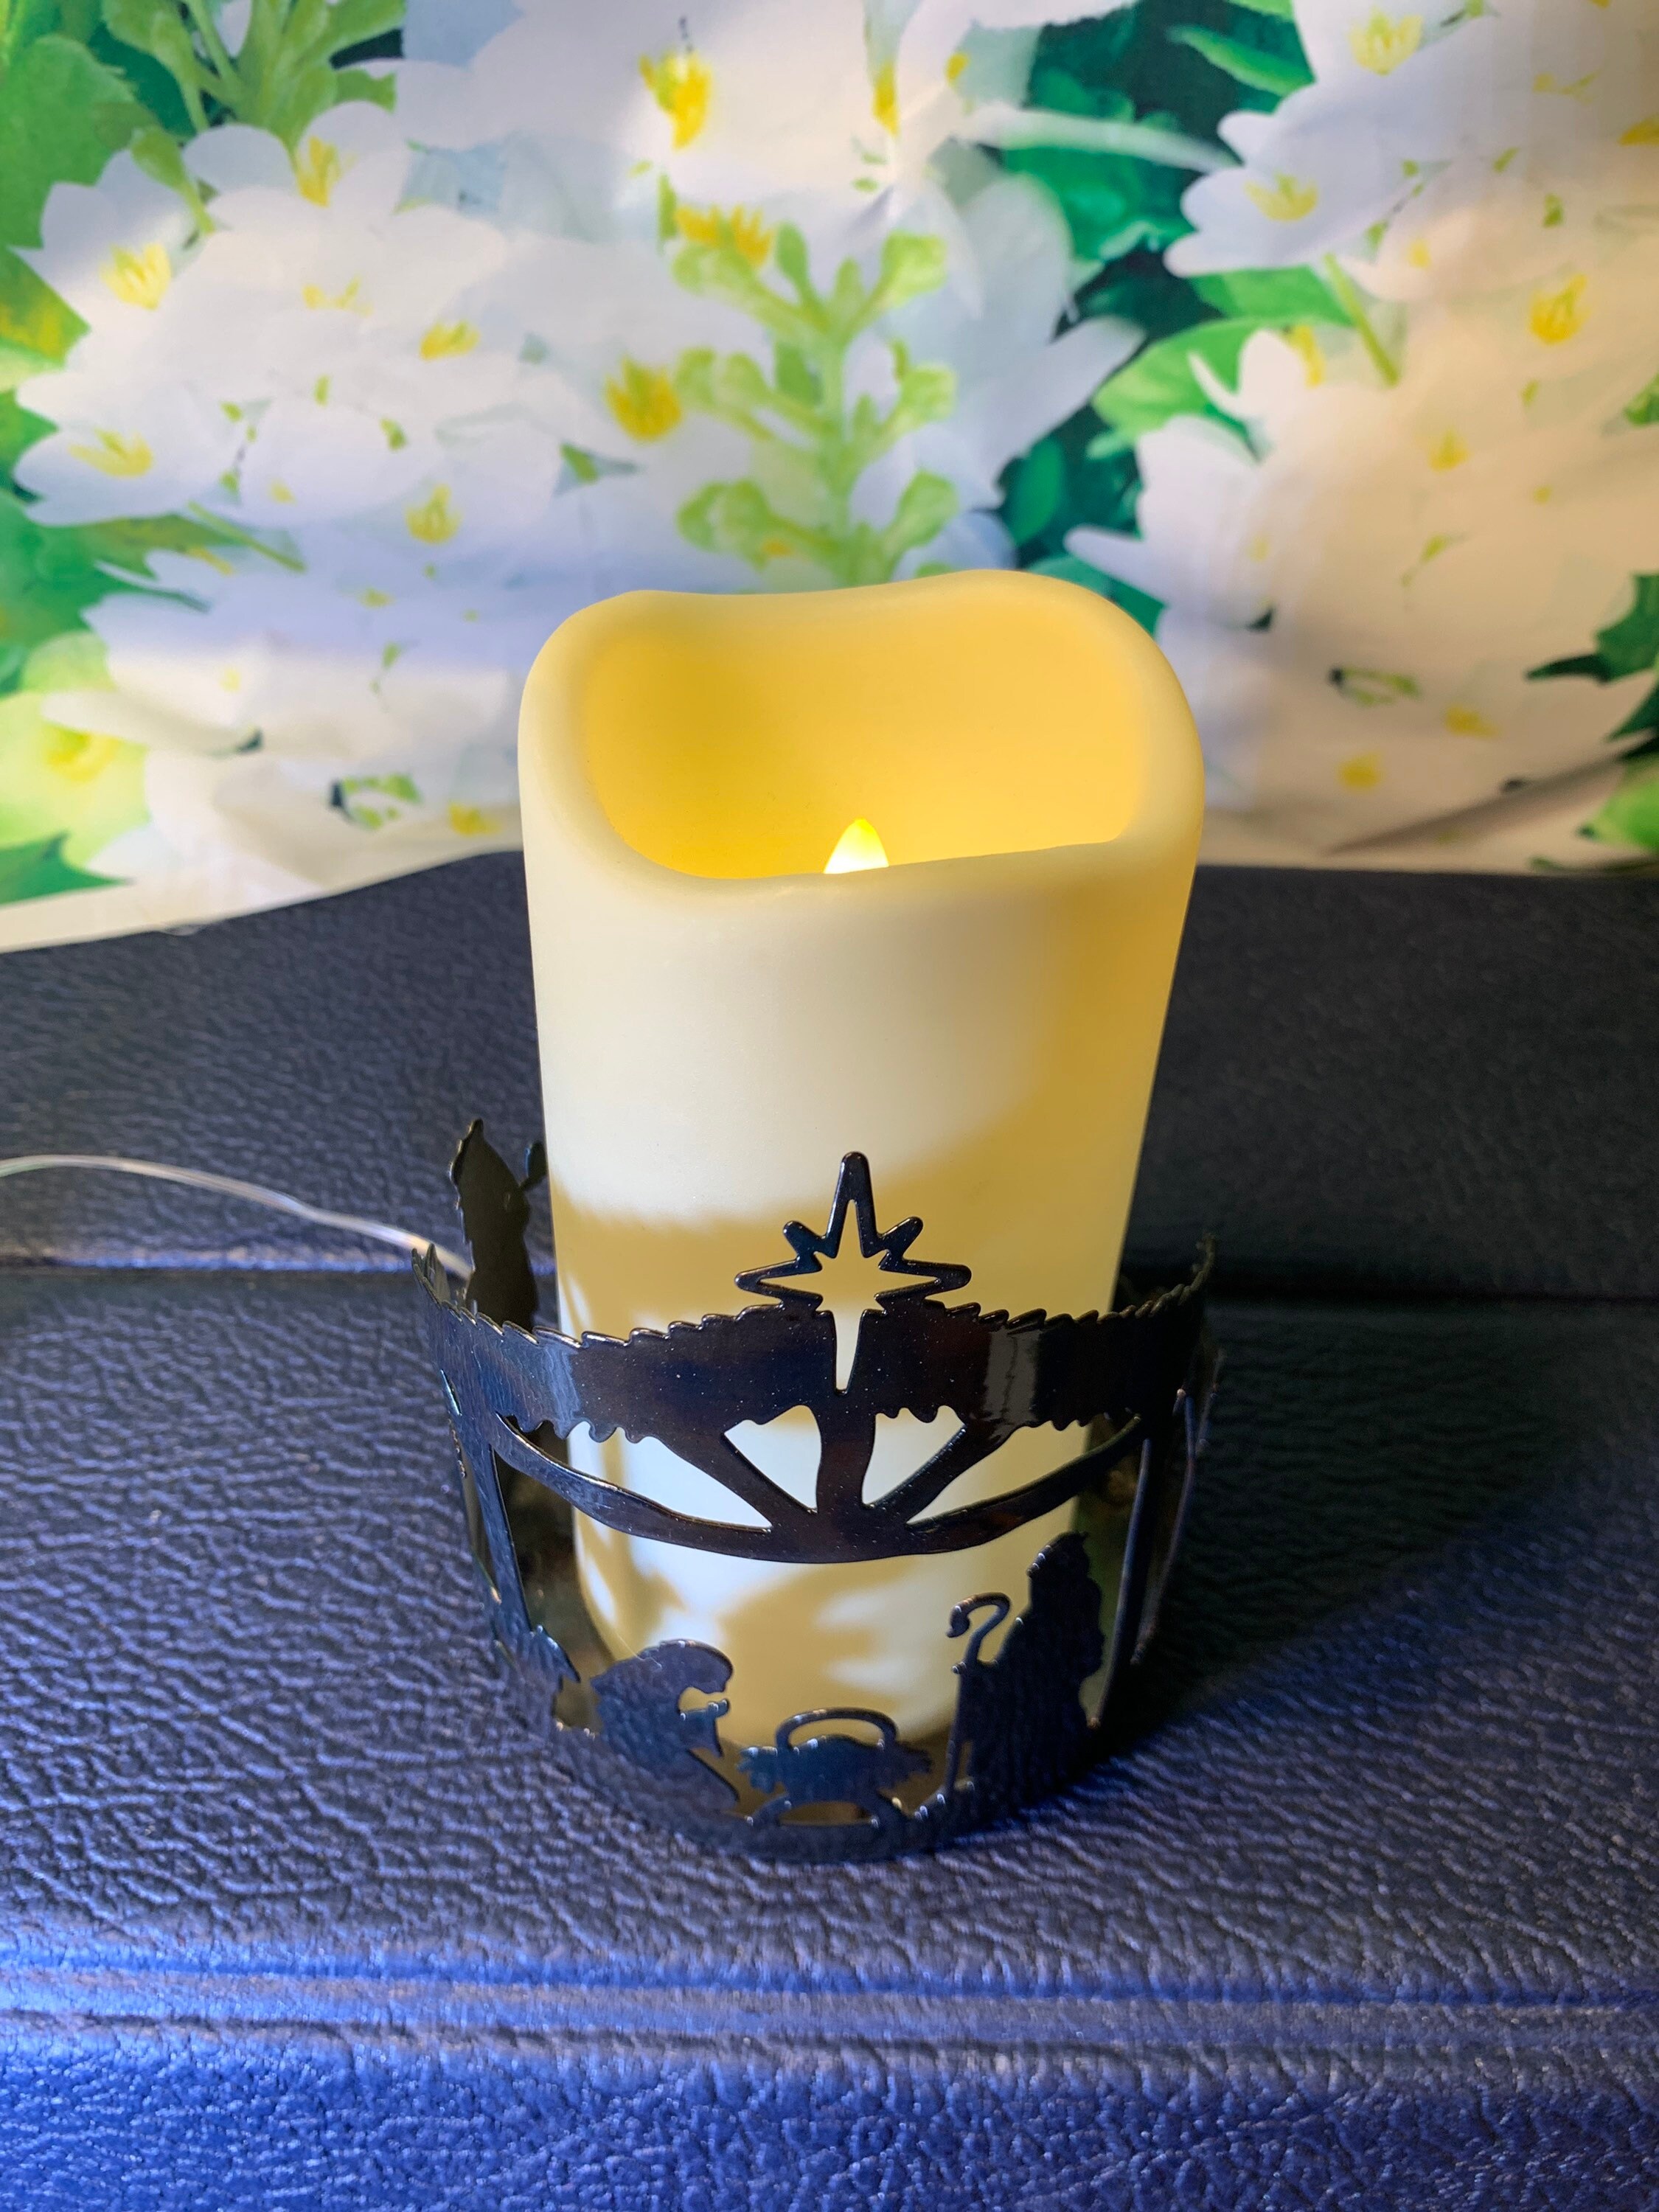 Christmas & Flameless Candles, Holders and Scents